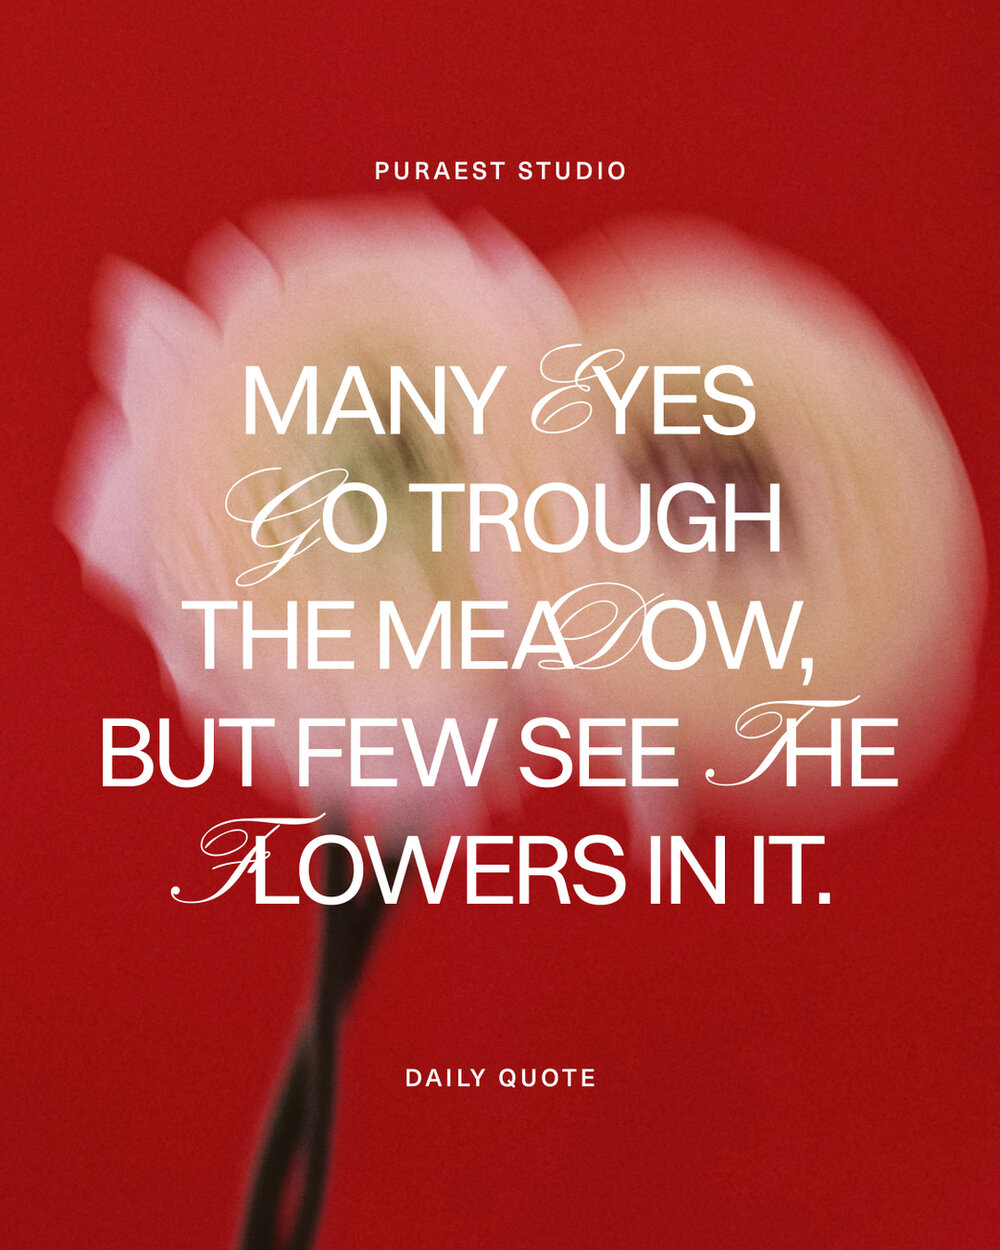 &quot;MANY EYES GO THROUGH THE MEADOW, BUT FEW SEE THE FLOWERS IN IT&quot; - Ralph Emerson​​​​​​​​
​​​​​​​​
What do you think this quote means? 🌷​​​​​​​​
​​​​​​​​
​​​​​​​​
#puraeststudio #creativestudio #quote #typography #dowhatyoulove #startupinsp